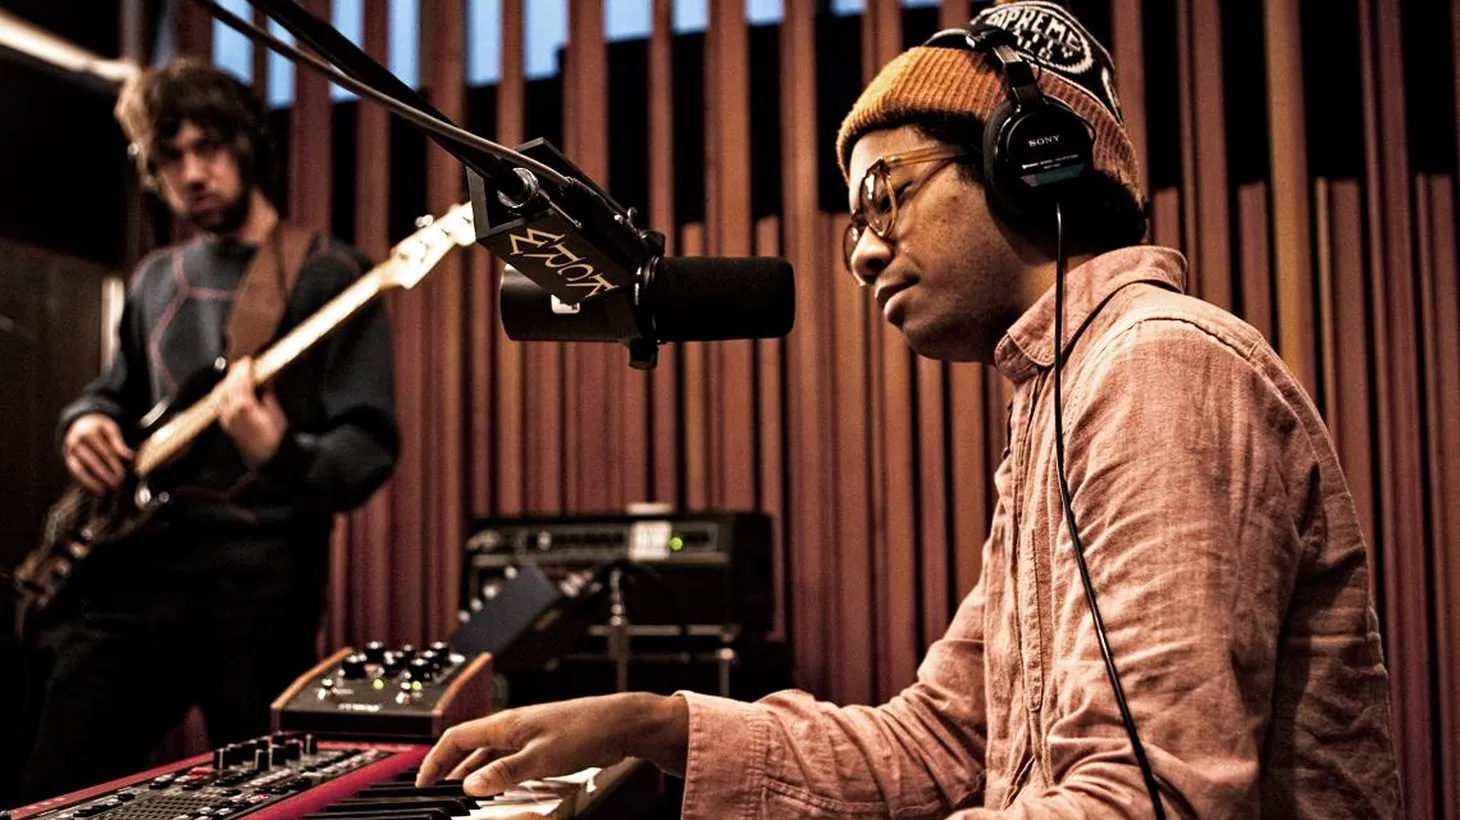 Toro y Moi's latest album has been at the top of KCRW's charts for weeks now...